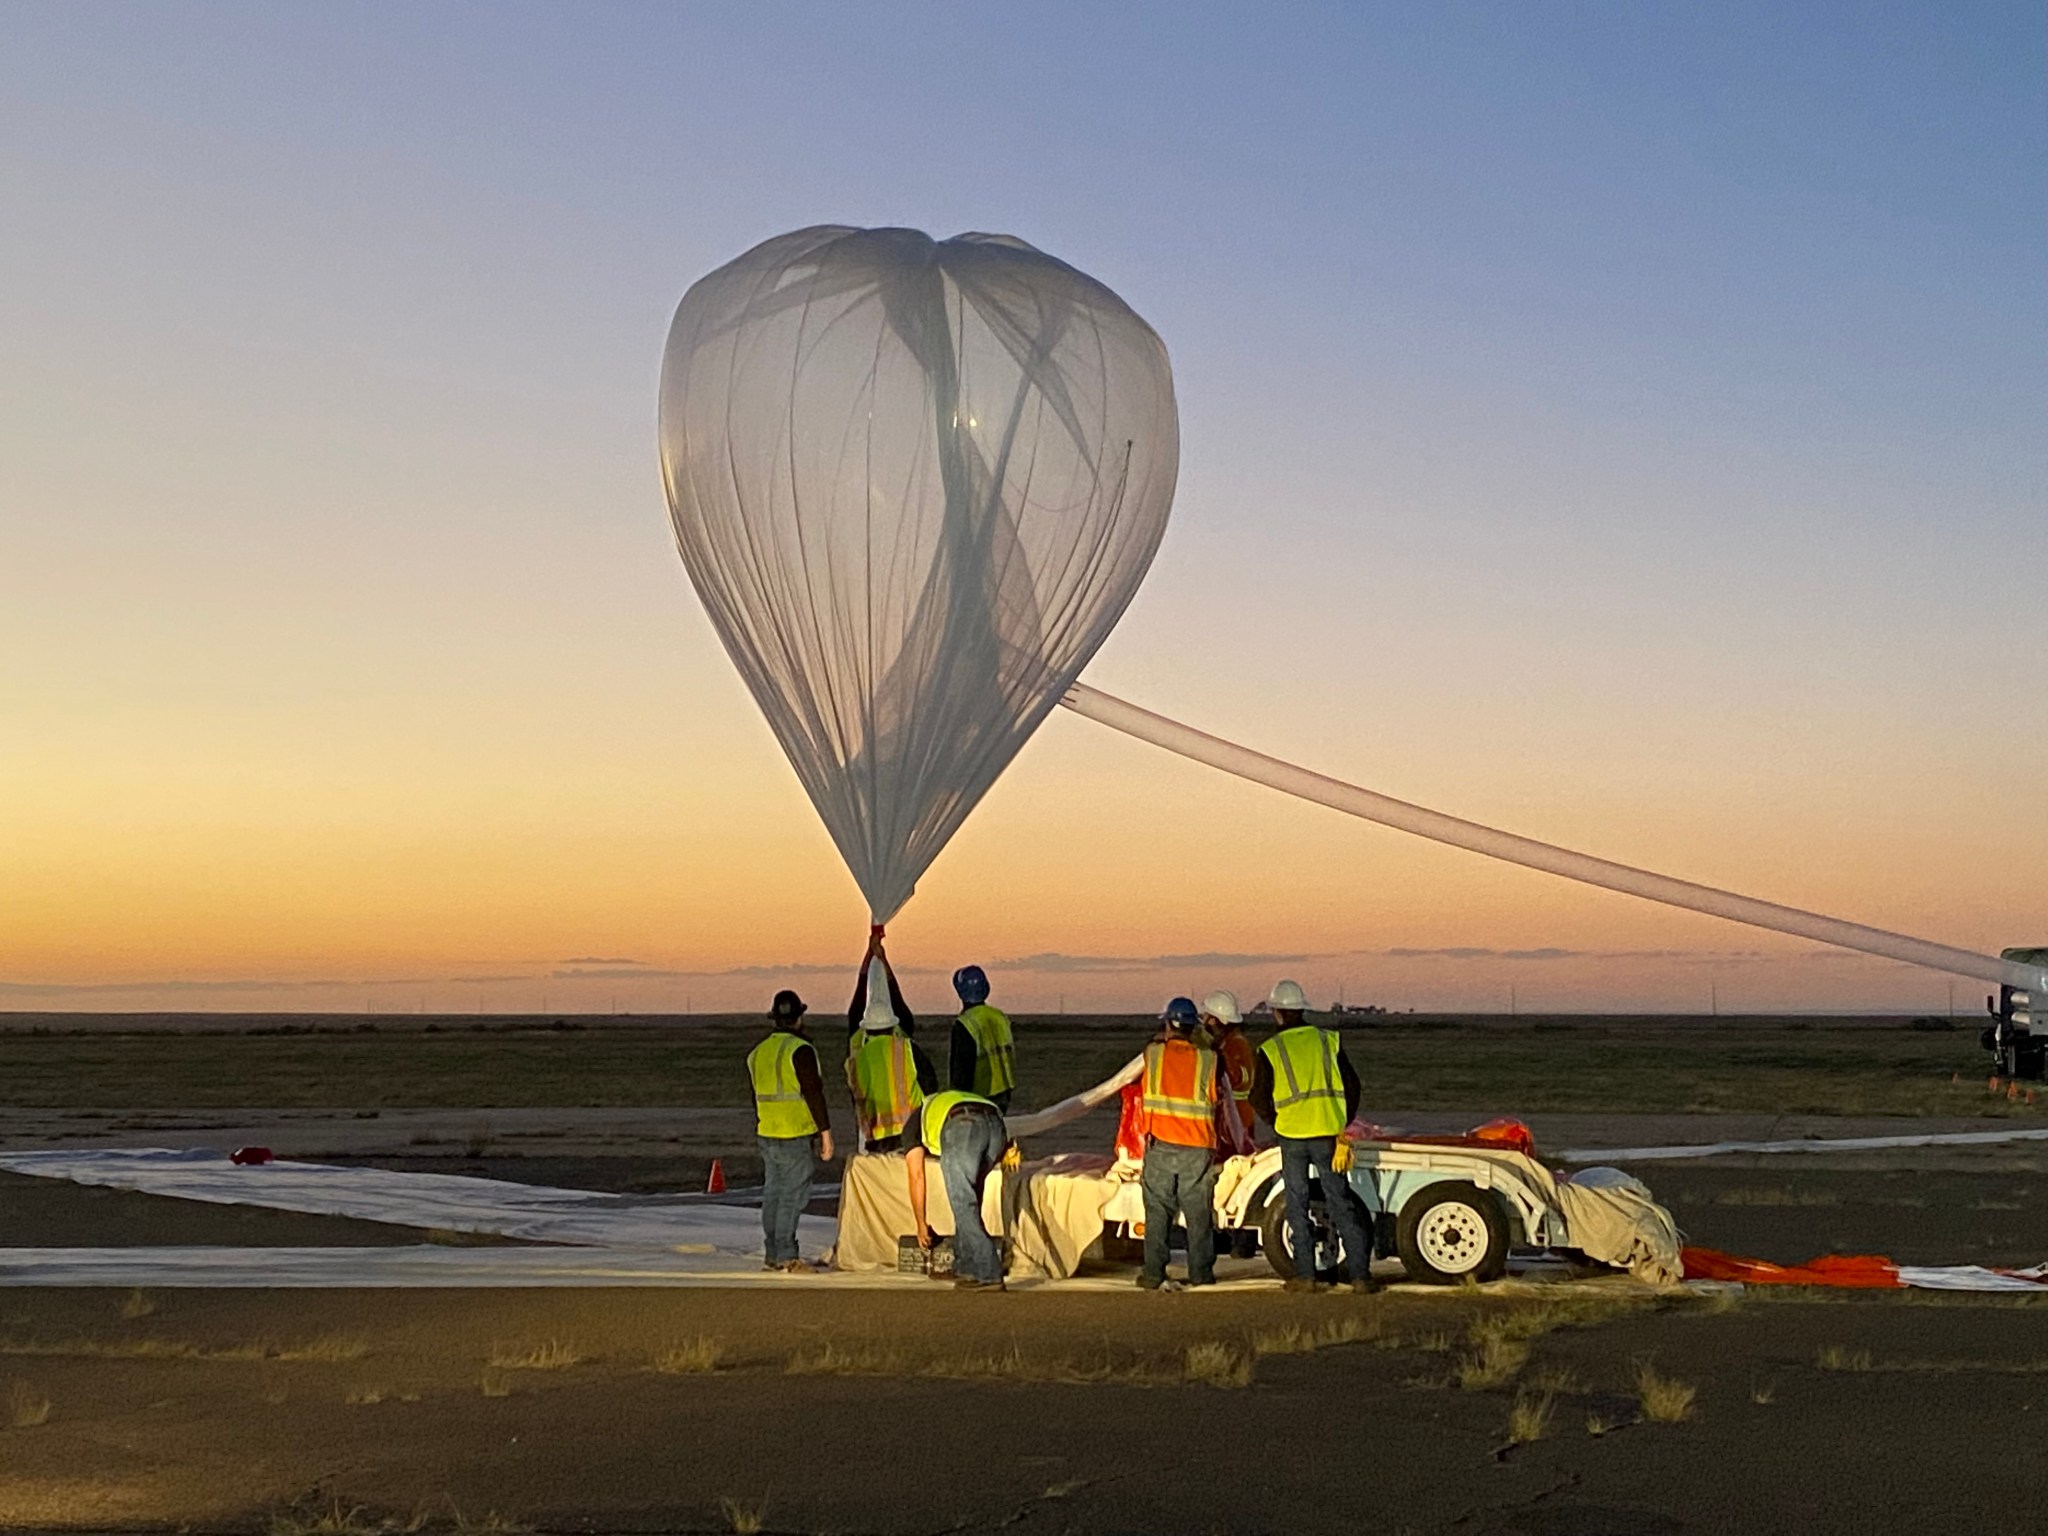 Teams prepare the hand-launch balloon for the TinMan mission from Ft. Sumner, New Mexico.